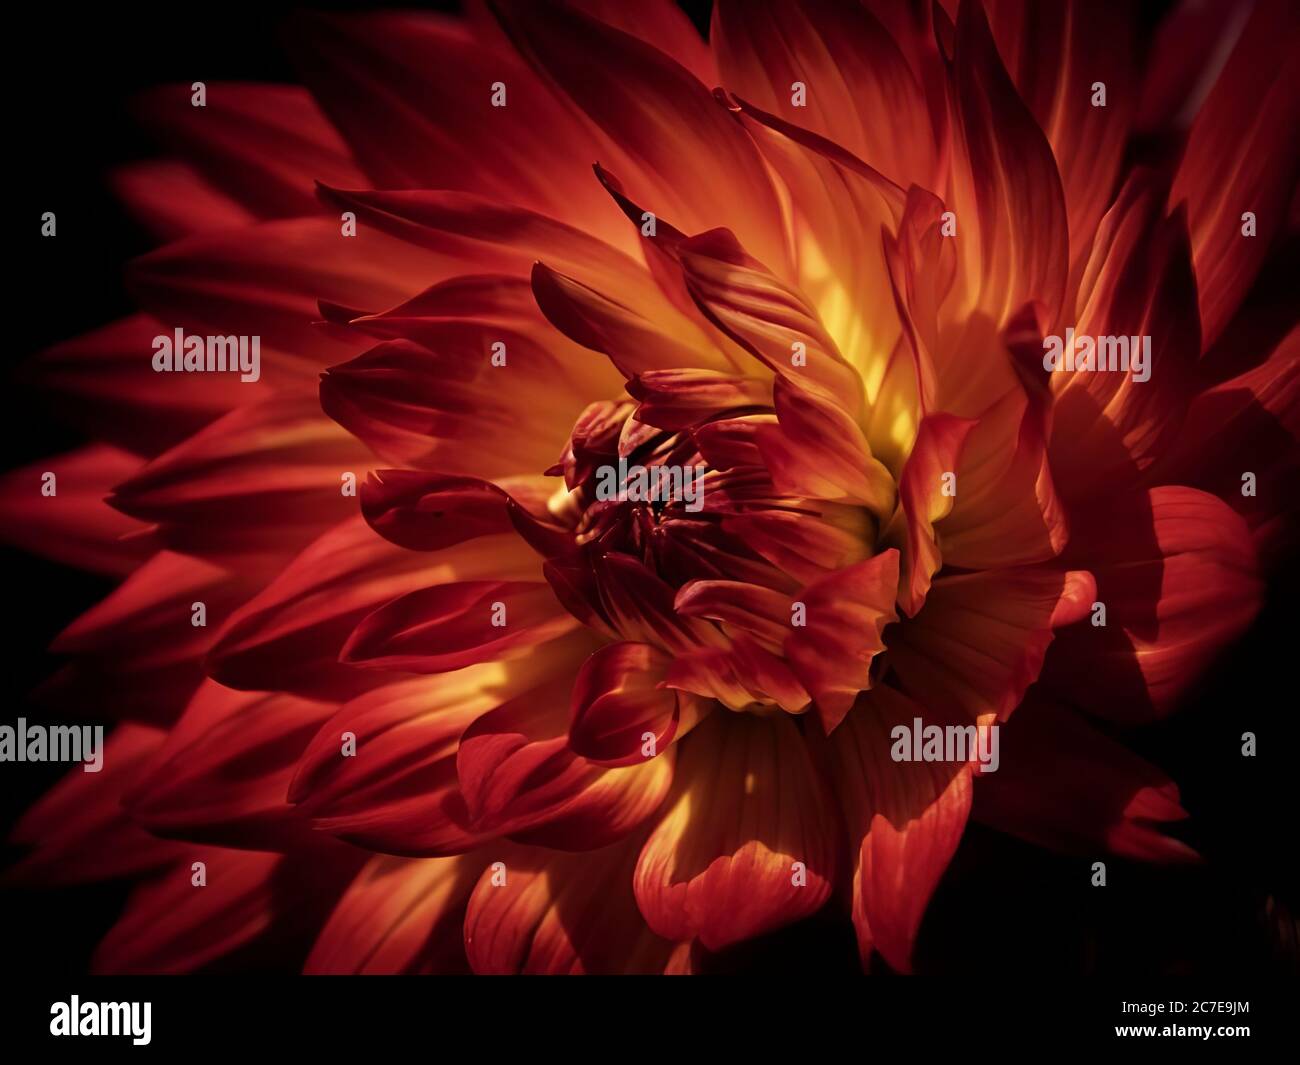 Dramatic close up of a dahlia flower looking like fire with black background Stock Photo